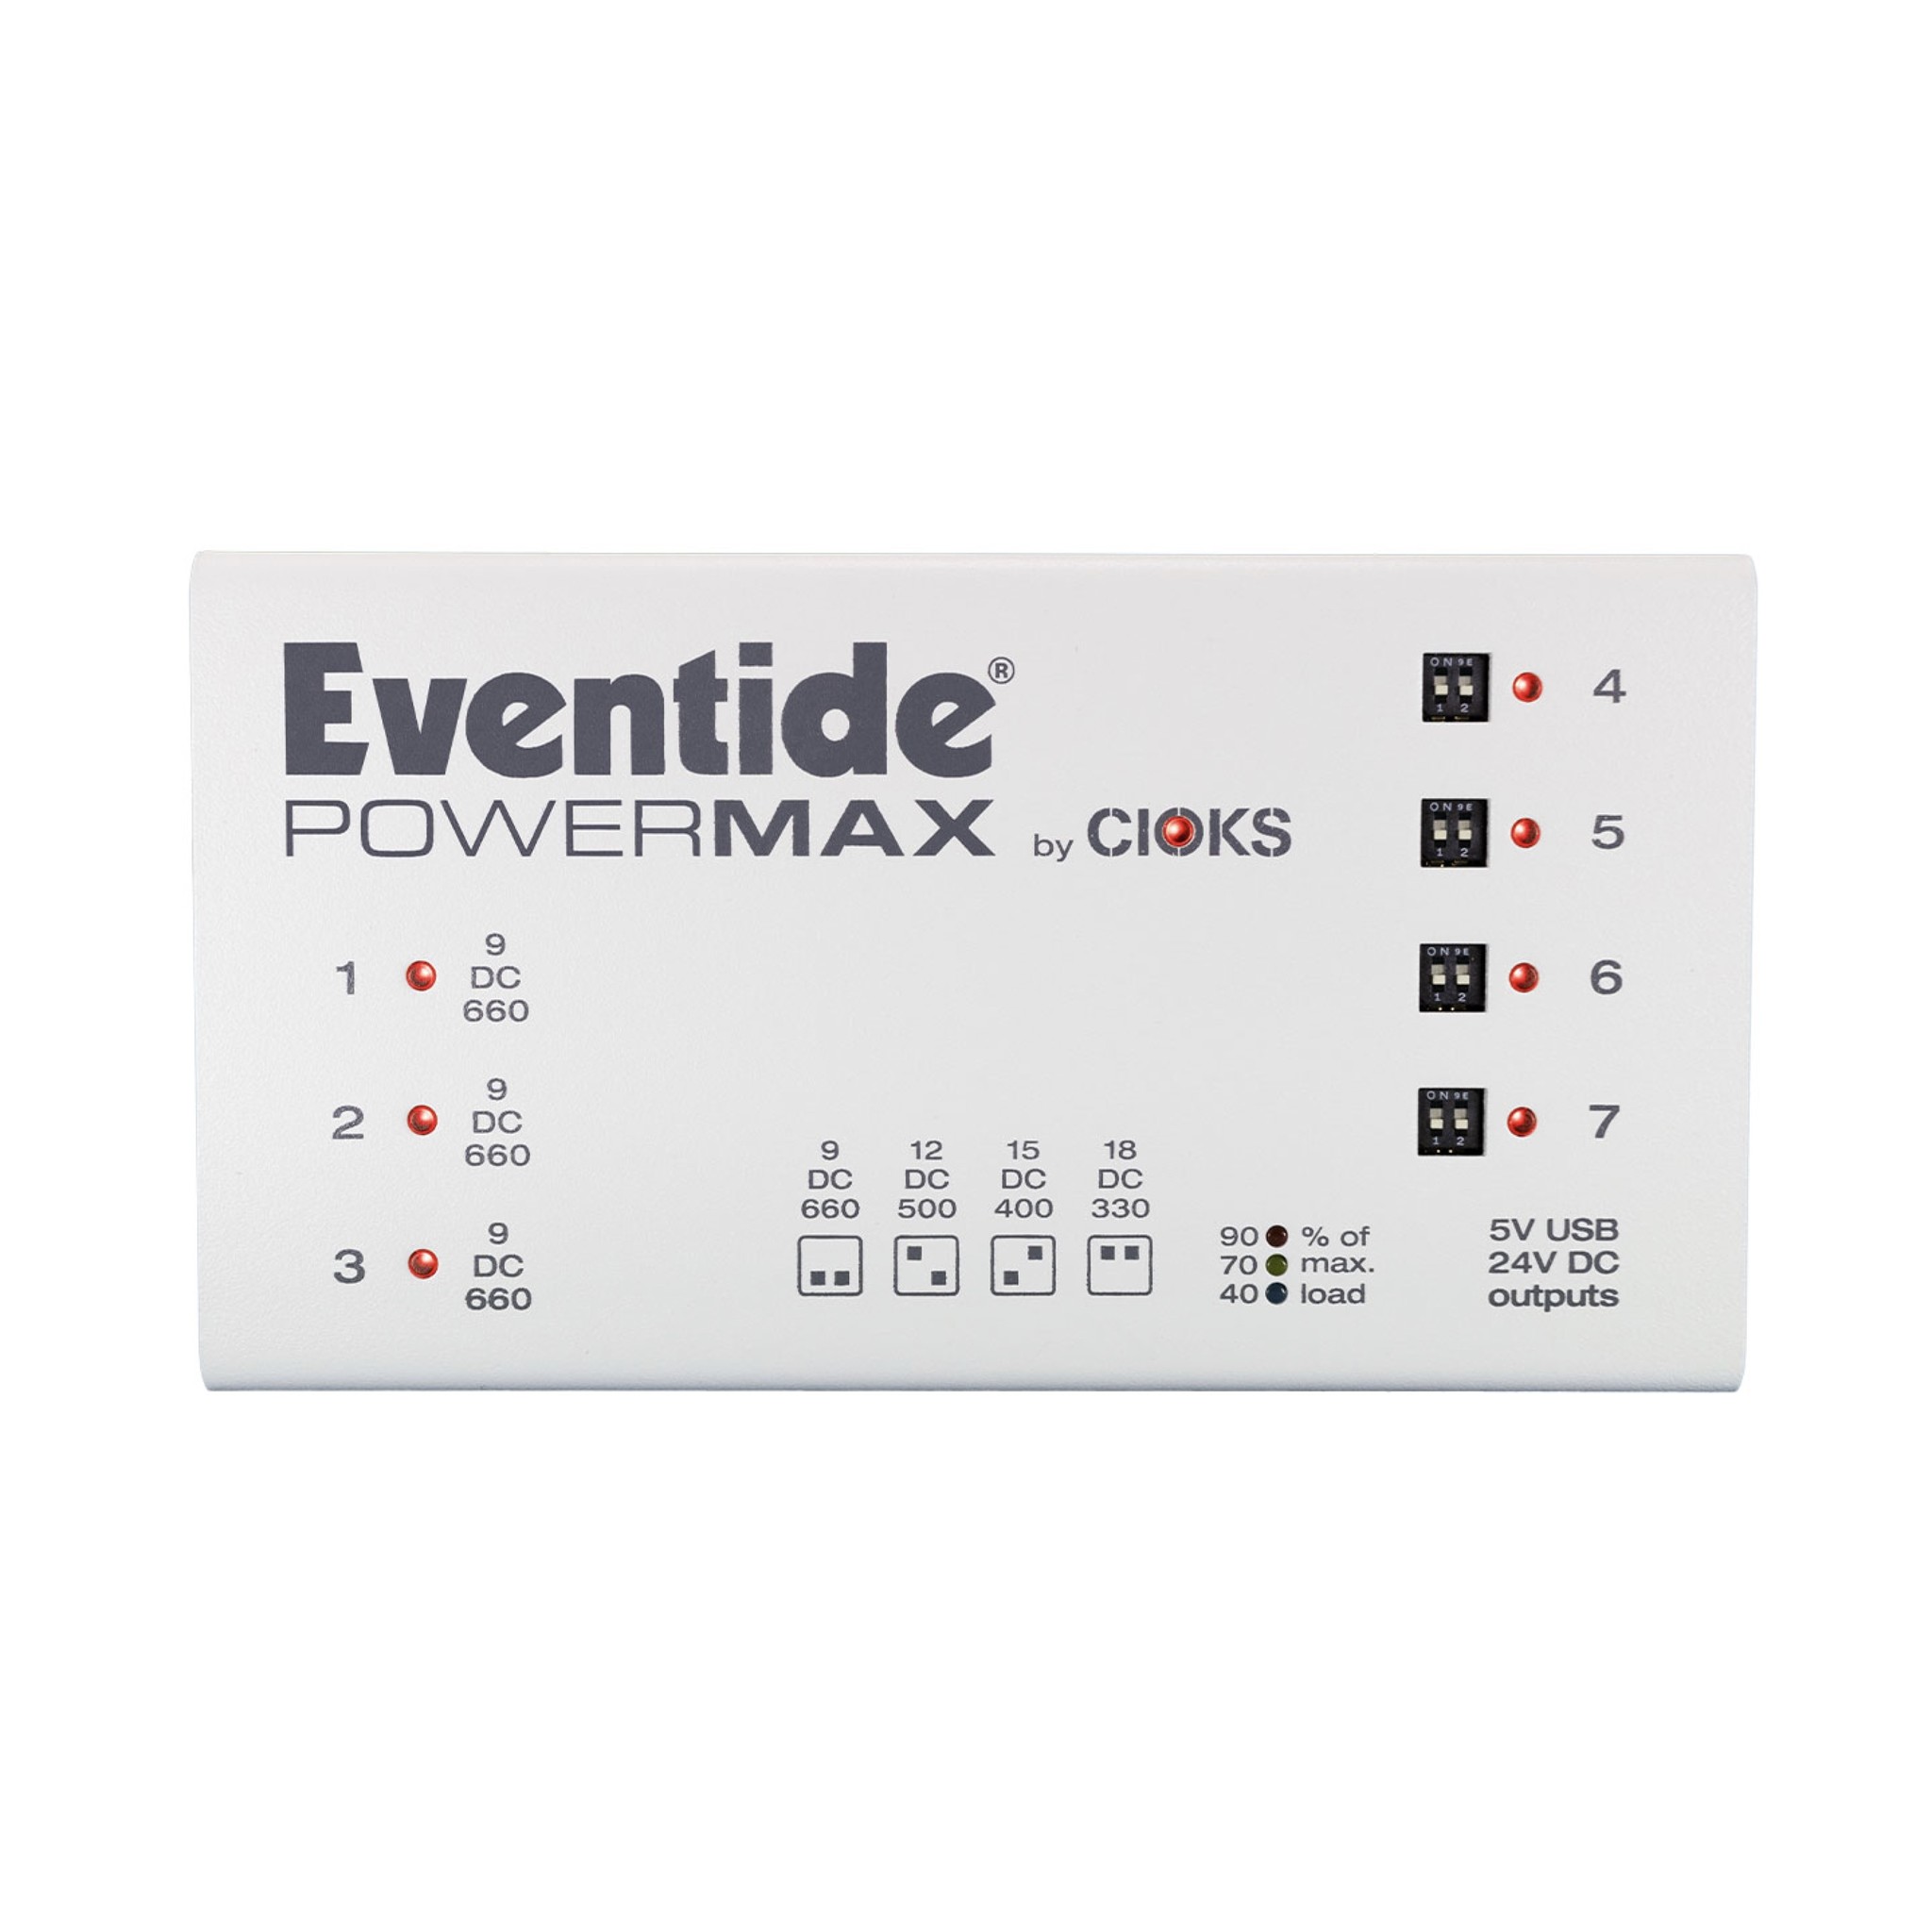 Eventide PowerMAX V2 Power Supply for Effects Pedals (7 variable outlets + USB)